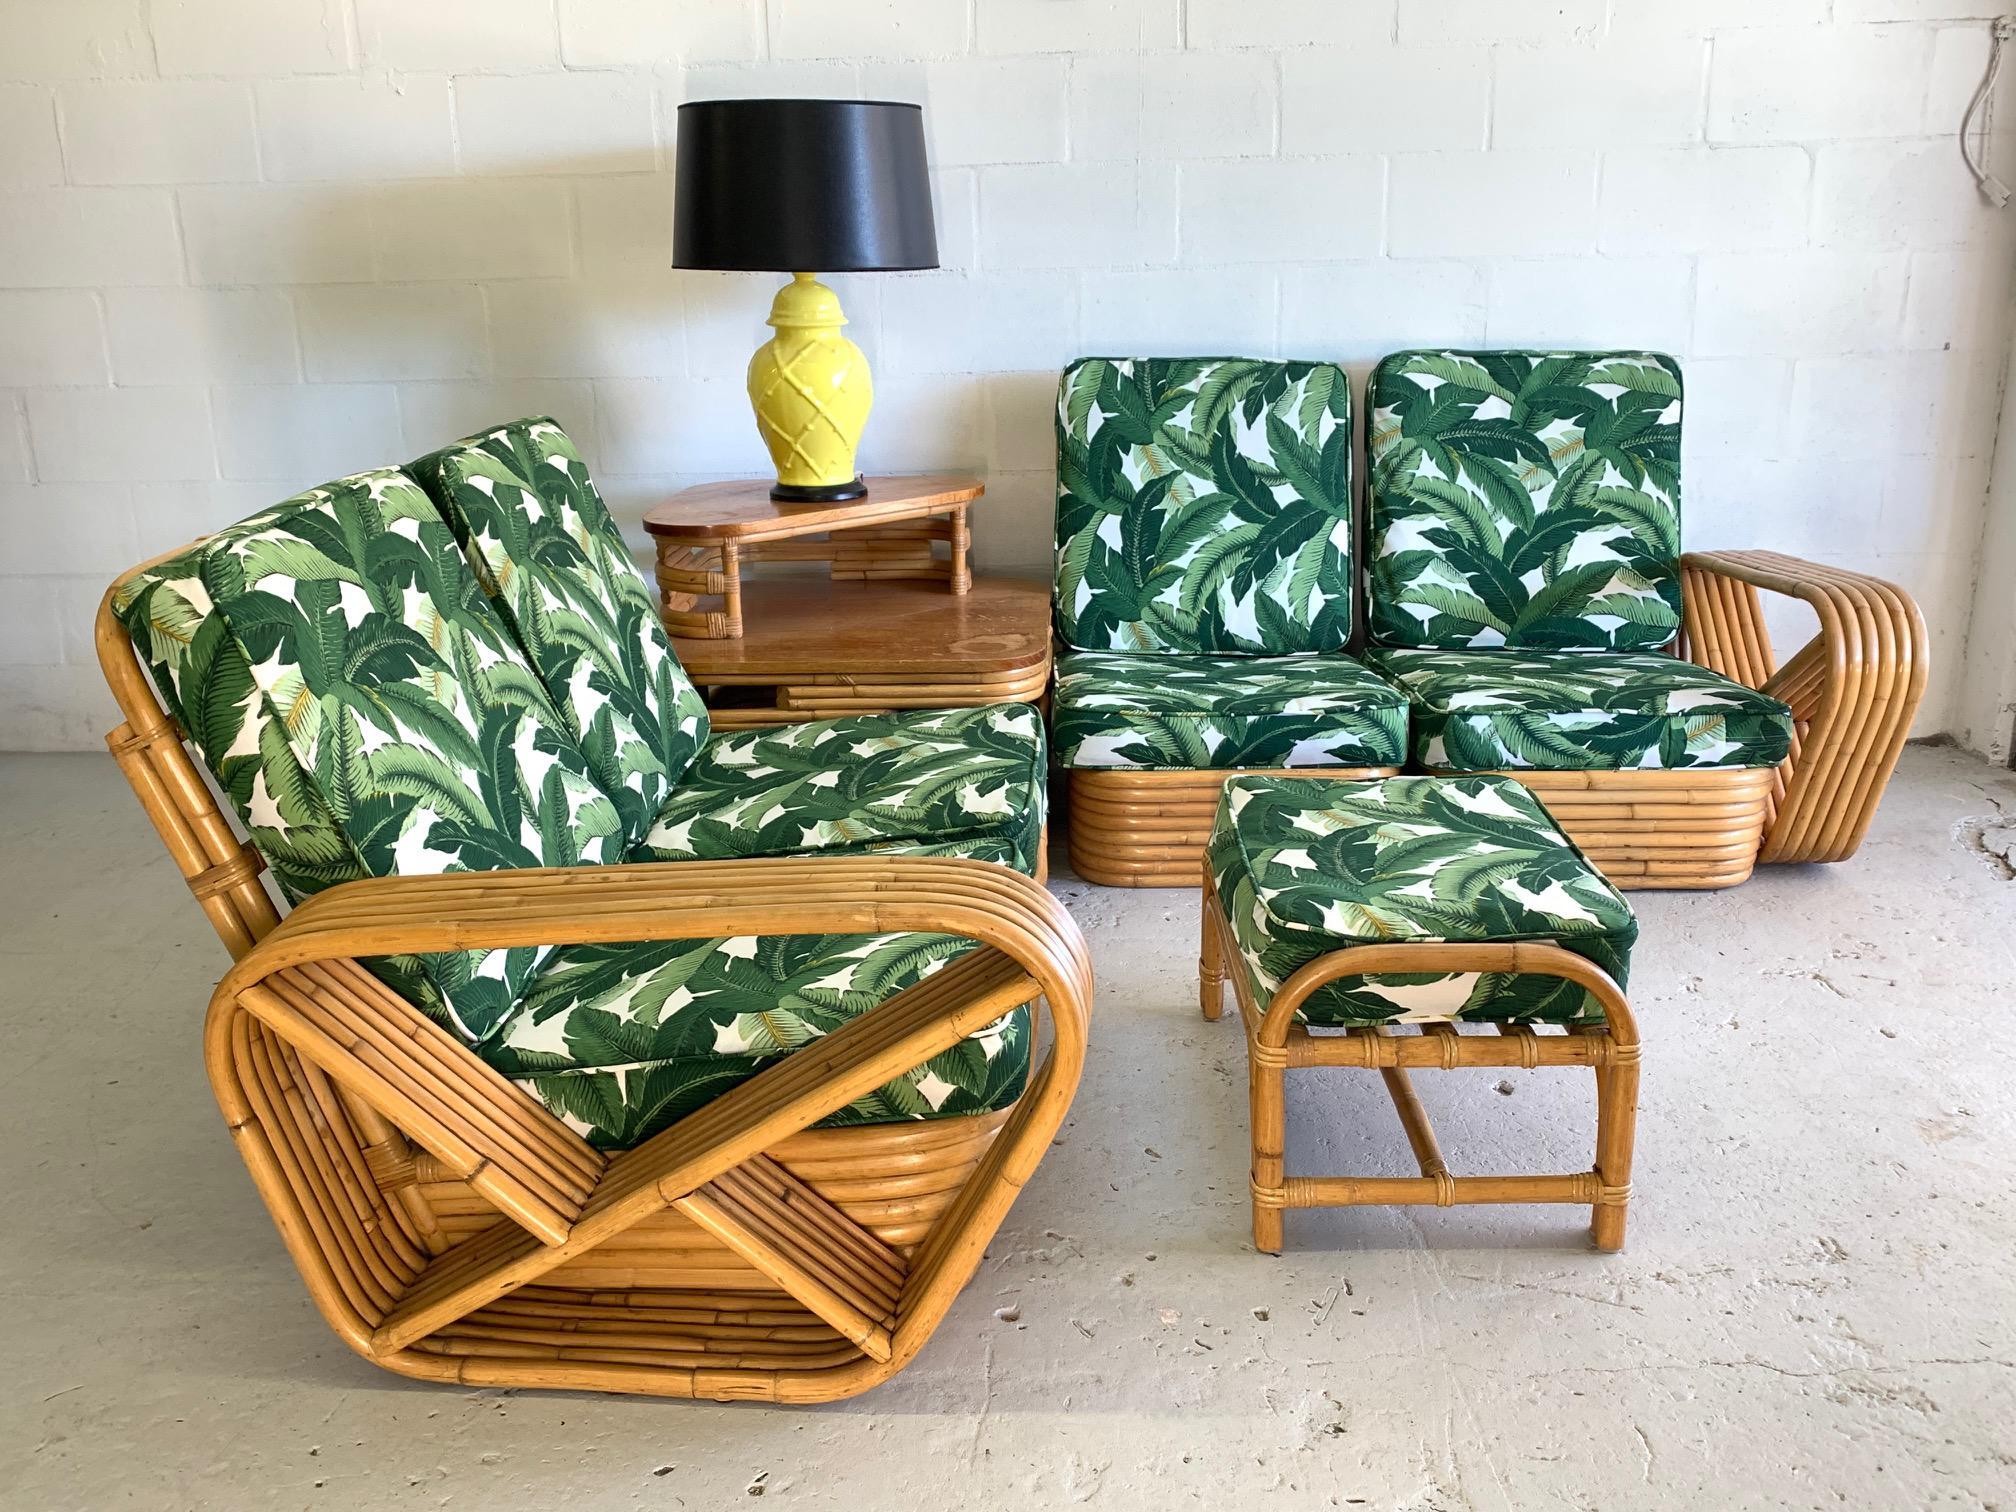 Four piece modular rattan Paul Frankl style pretzel sofa features 6-strand frame and newly upholstered tropical palm leaf fabric. Very good condition both structurally and cosmetically with minor imperfections consistent with age. Can be arranged